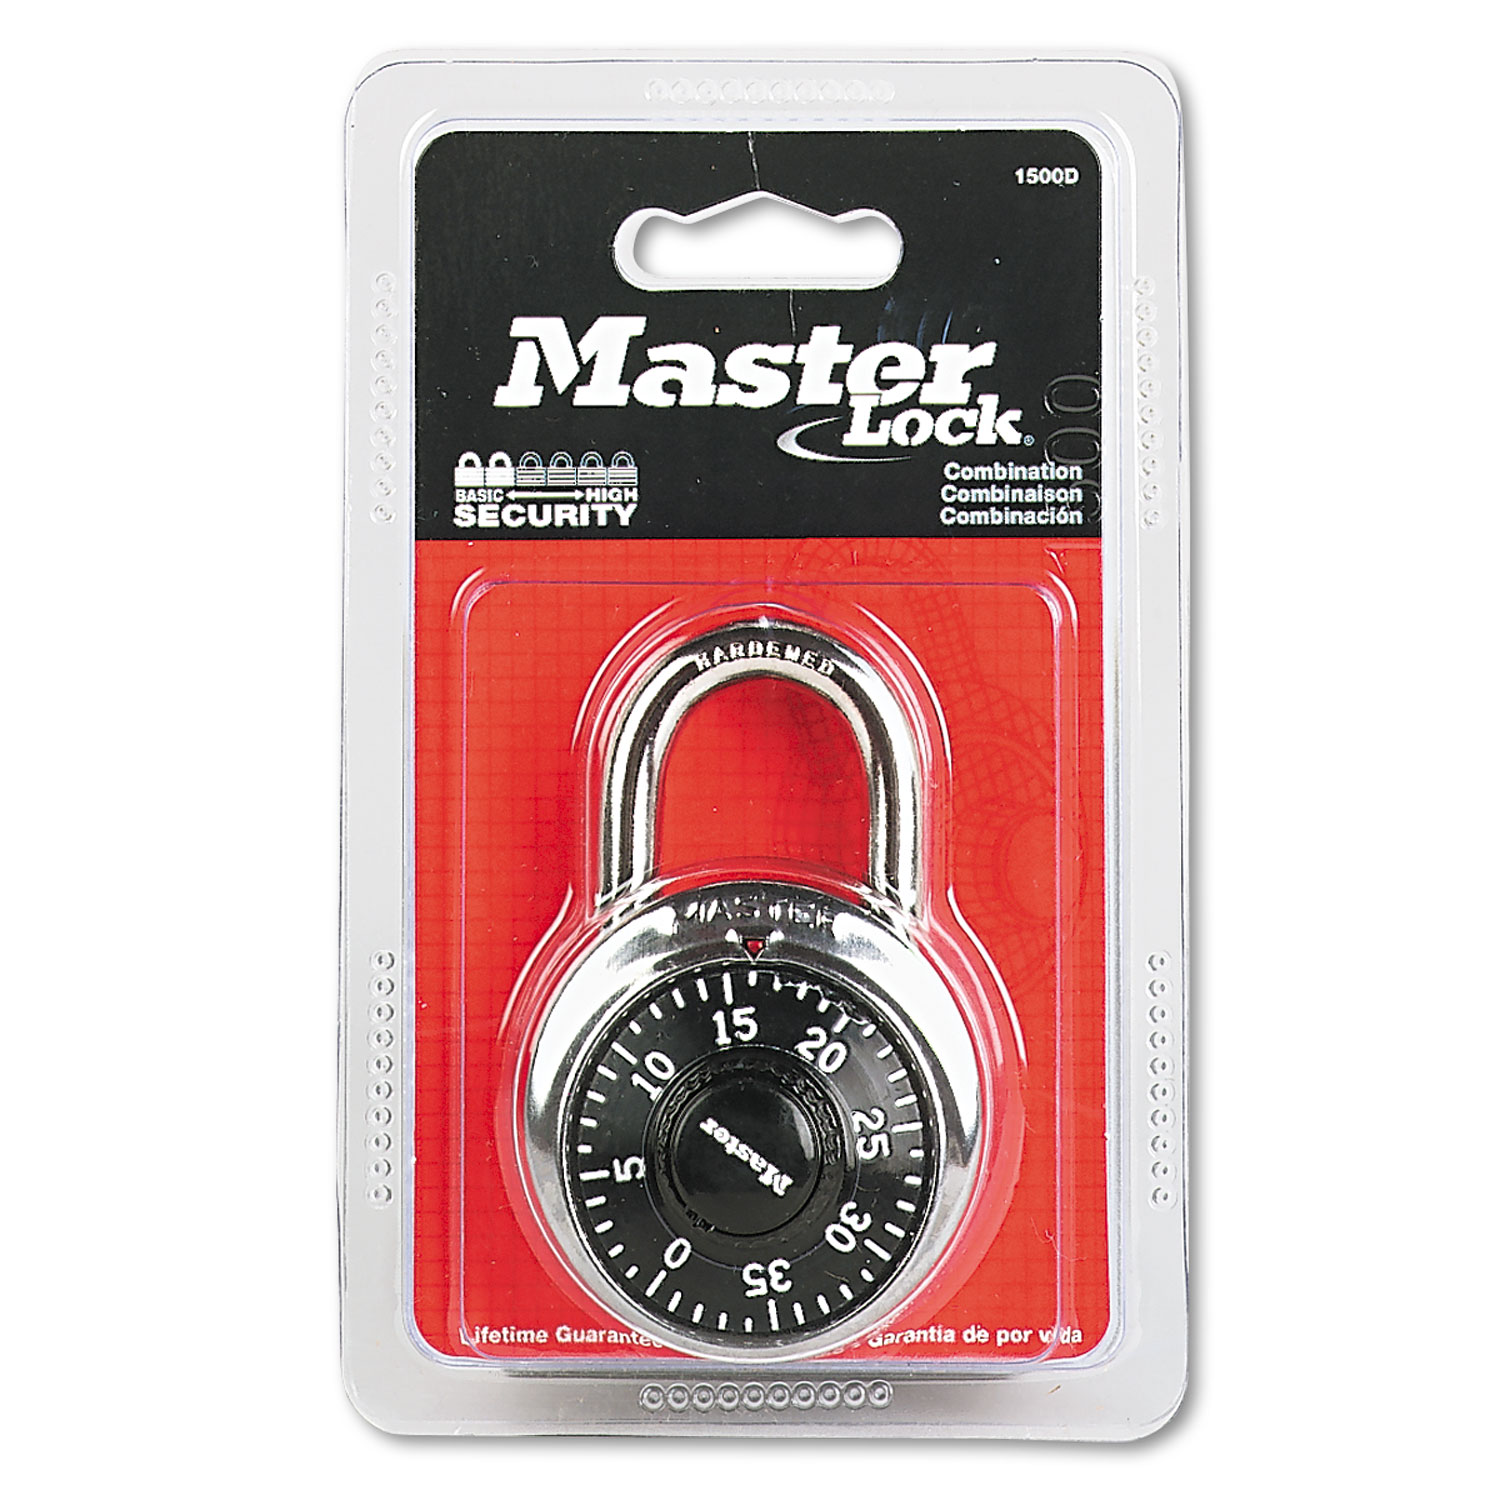  Master Lock 1500D Combination Lock, Stainless Steel, 1 7/8 Wide, Black Dial (MLK1500D) 